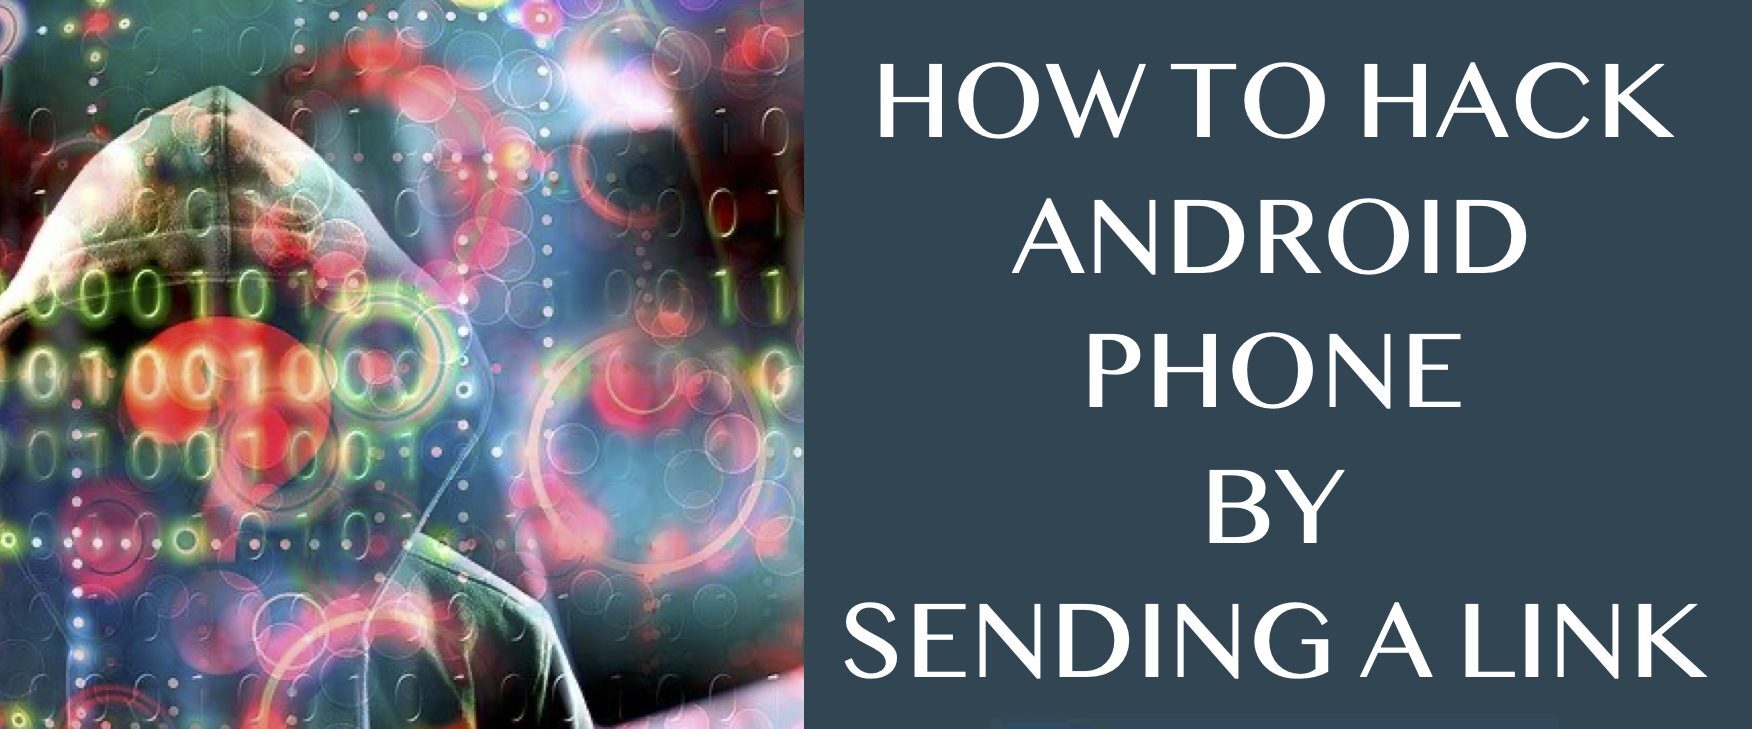 how to hack android phone by sending a link